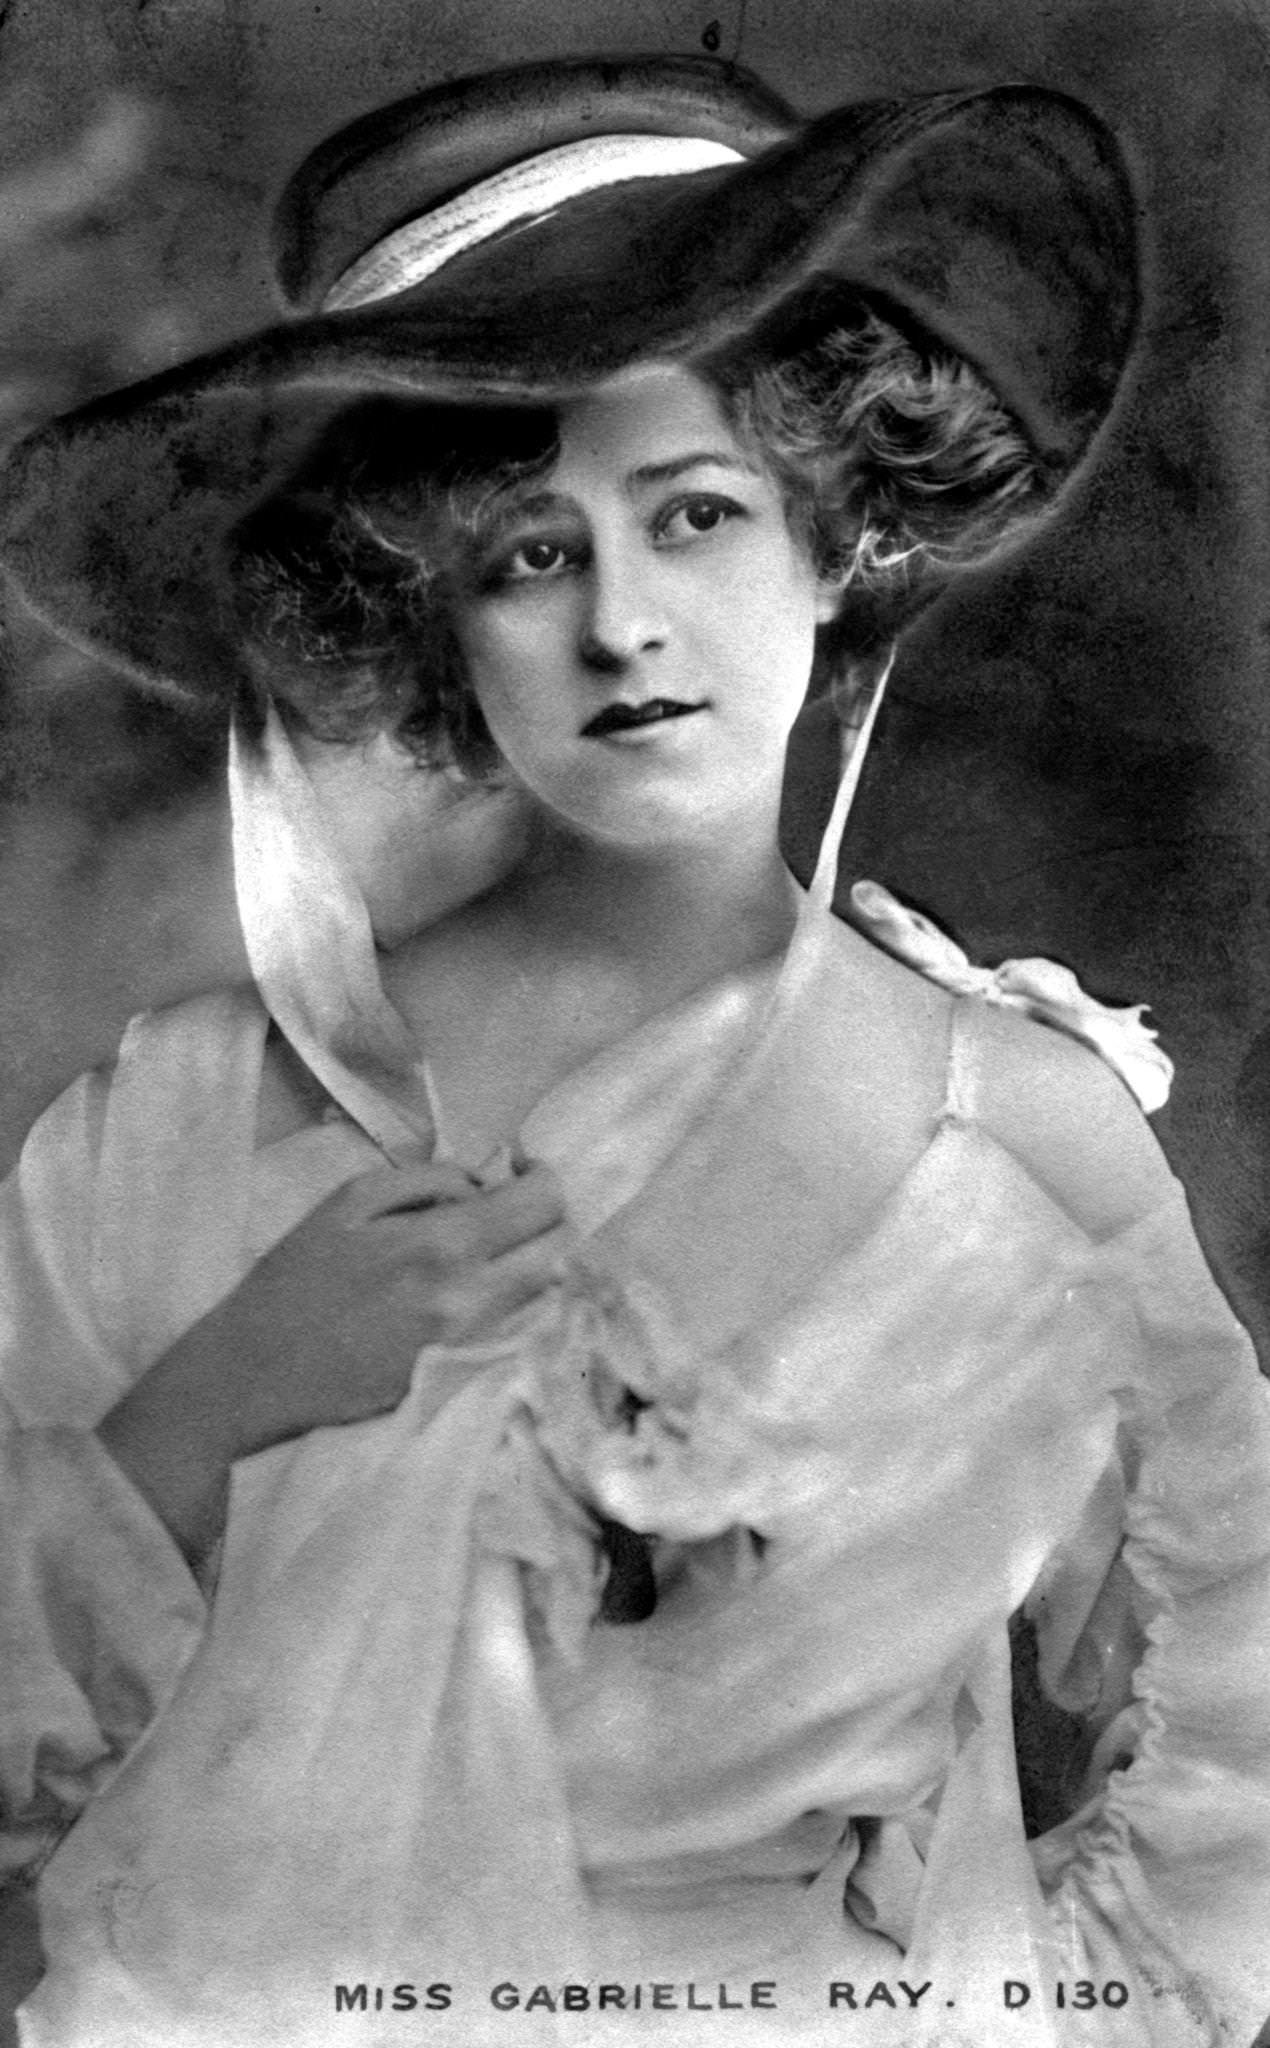 Camille Clifford poses for a portrait in the early 1900s